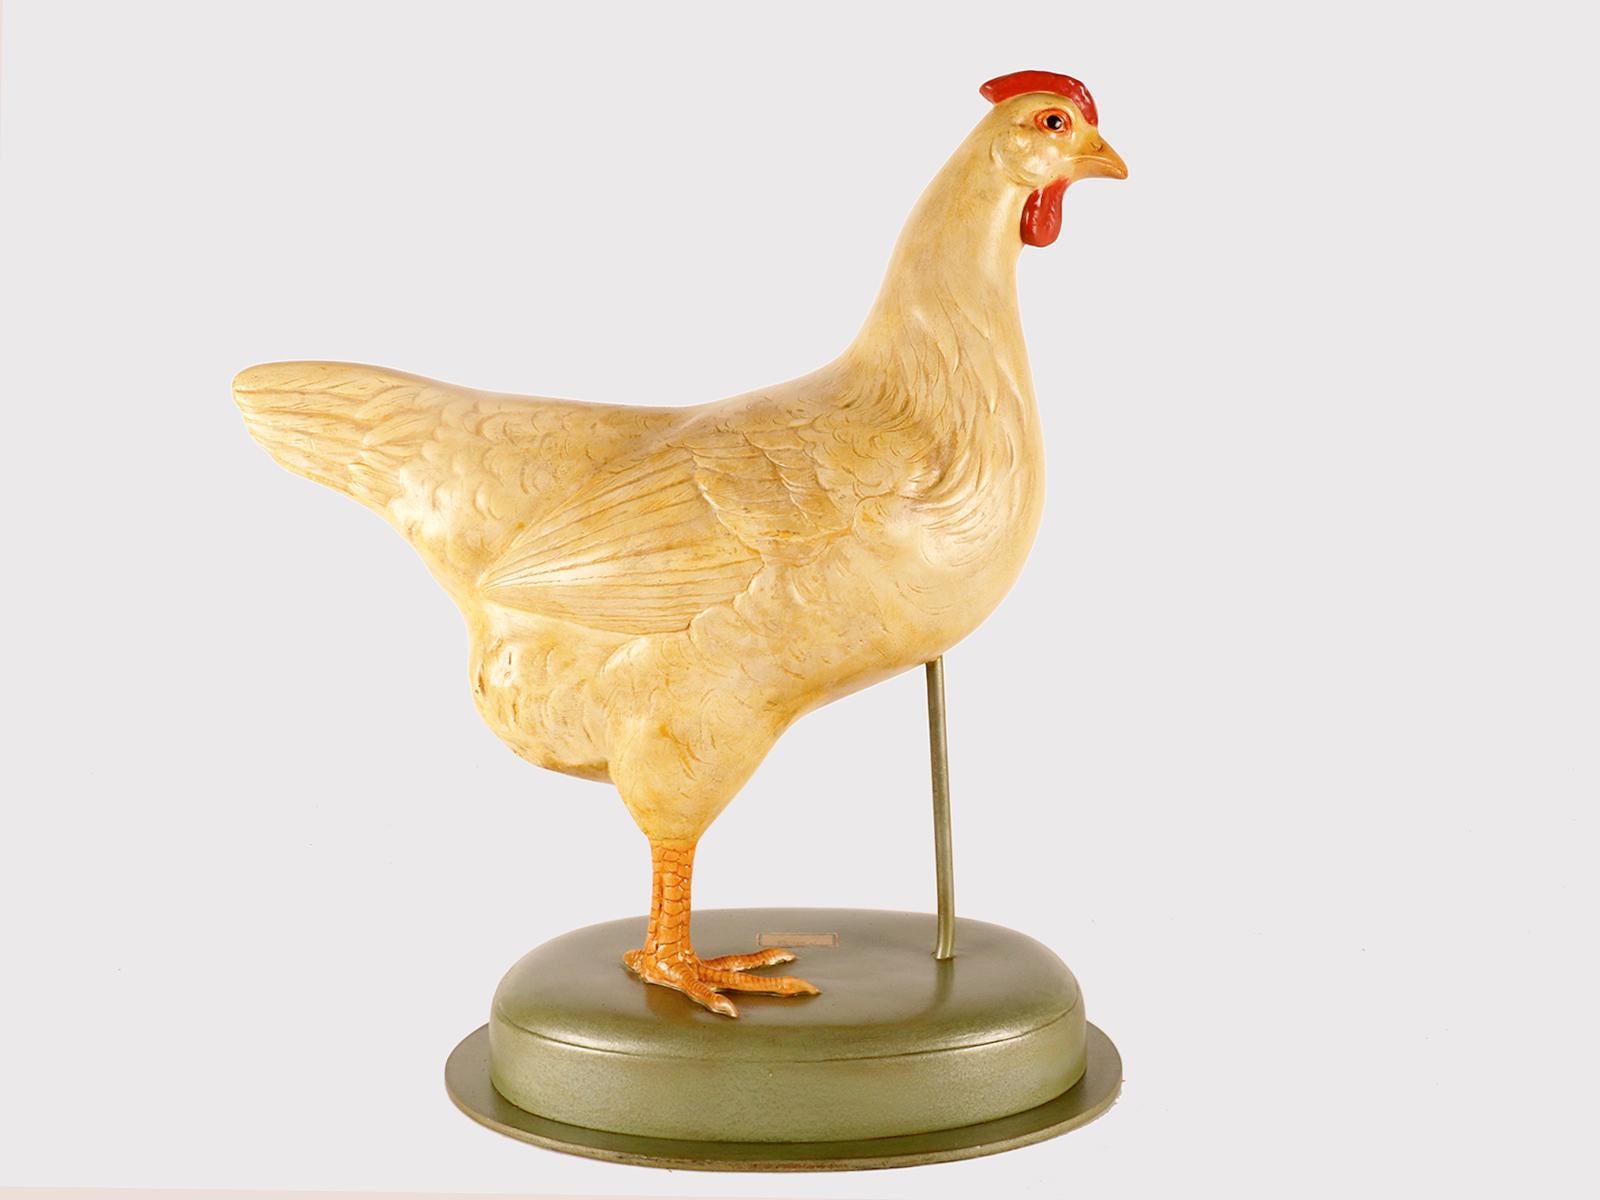 A life-size anatomical model of a chicken, with separable anatomical parts, for educational use. Made of painted plaster, wooden and metal base. Somso, Germany circa 1930.